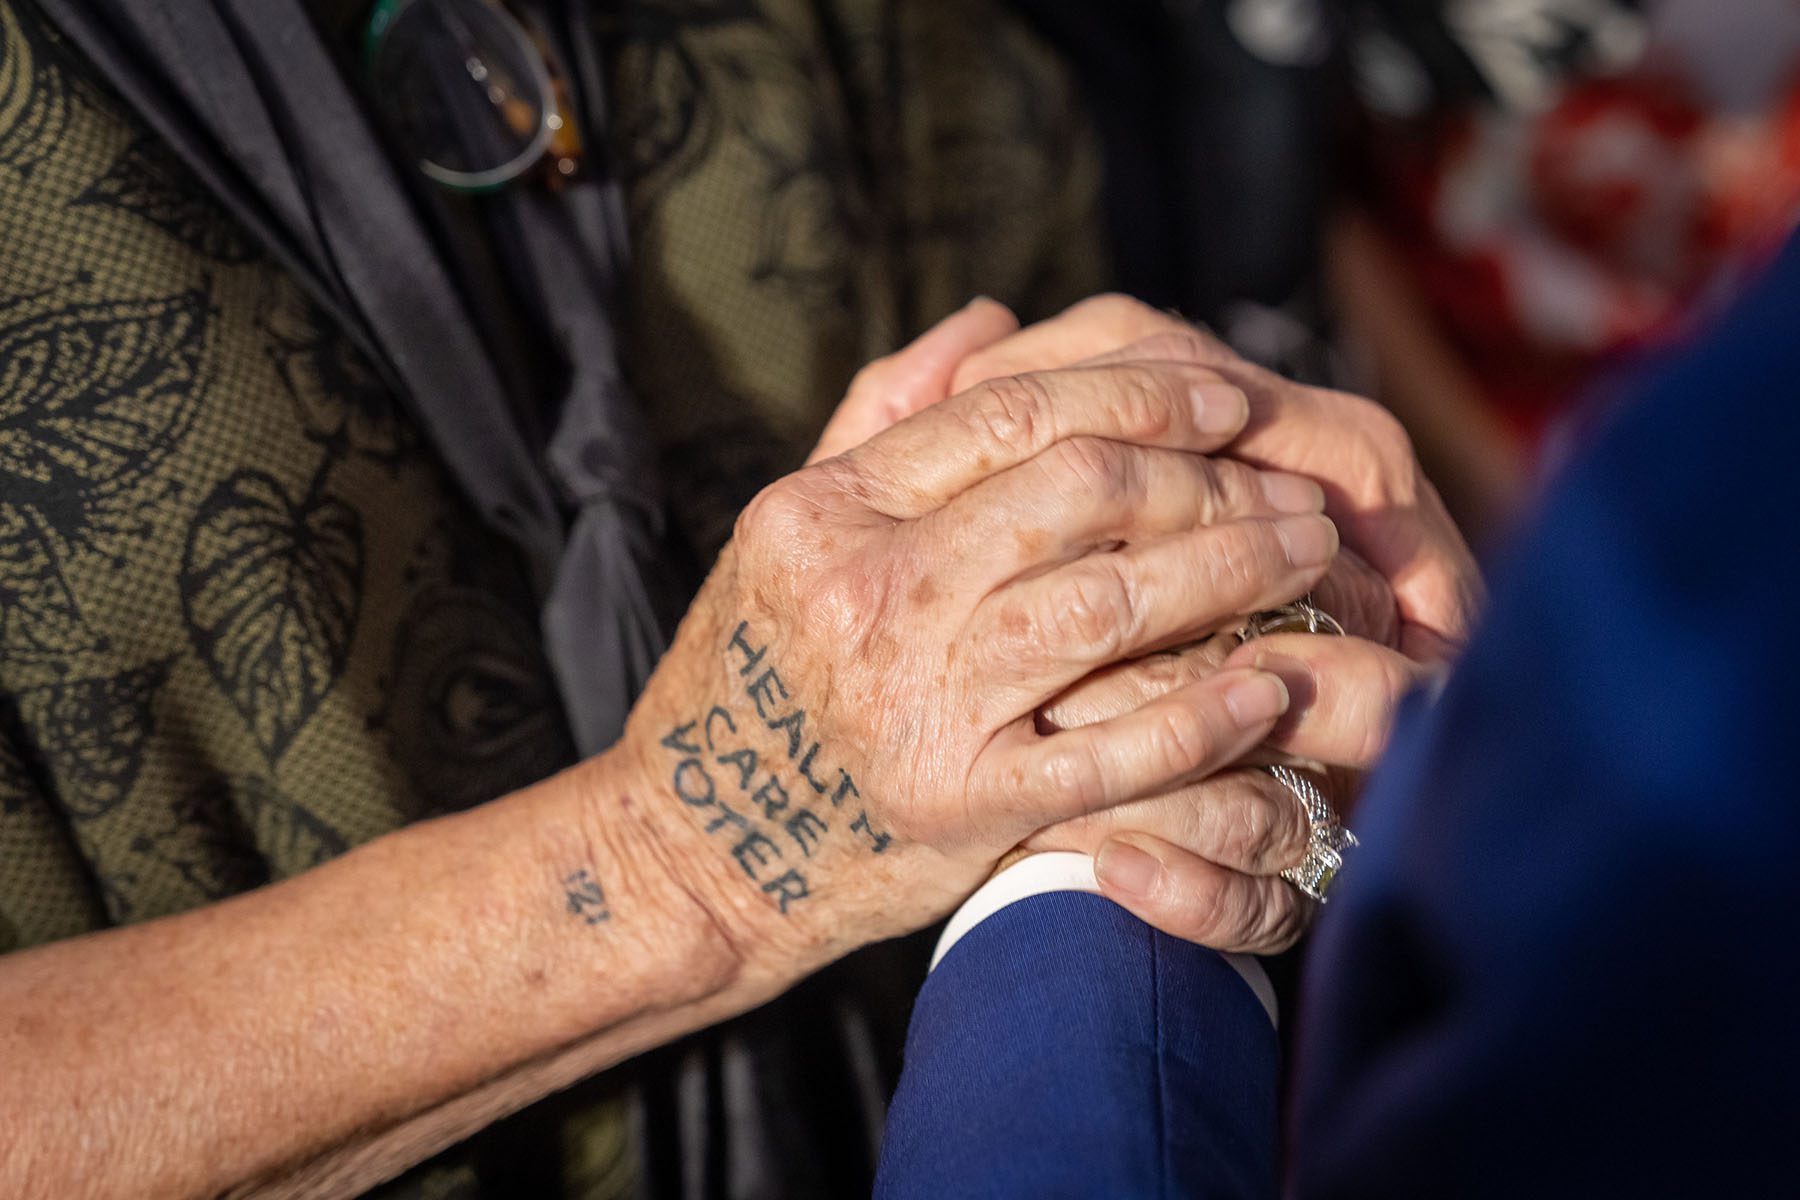 A detail shot of President Biden holding an attendees hand on which is written "health care voter" after an event at the University of Tampa, Florida.